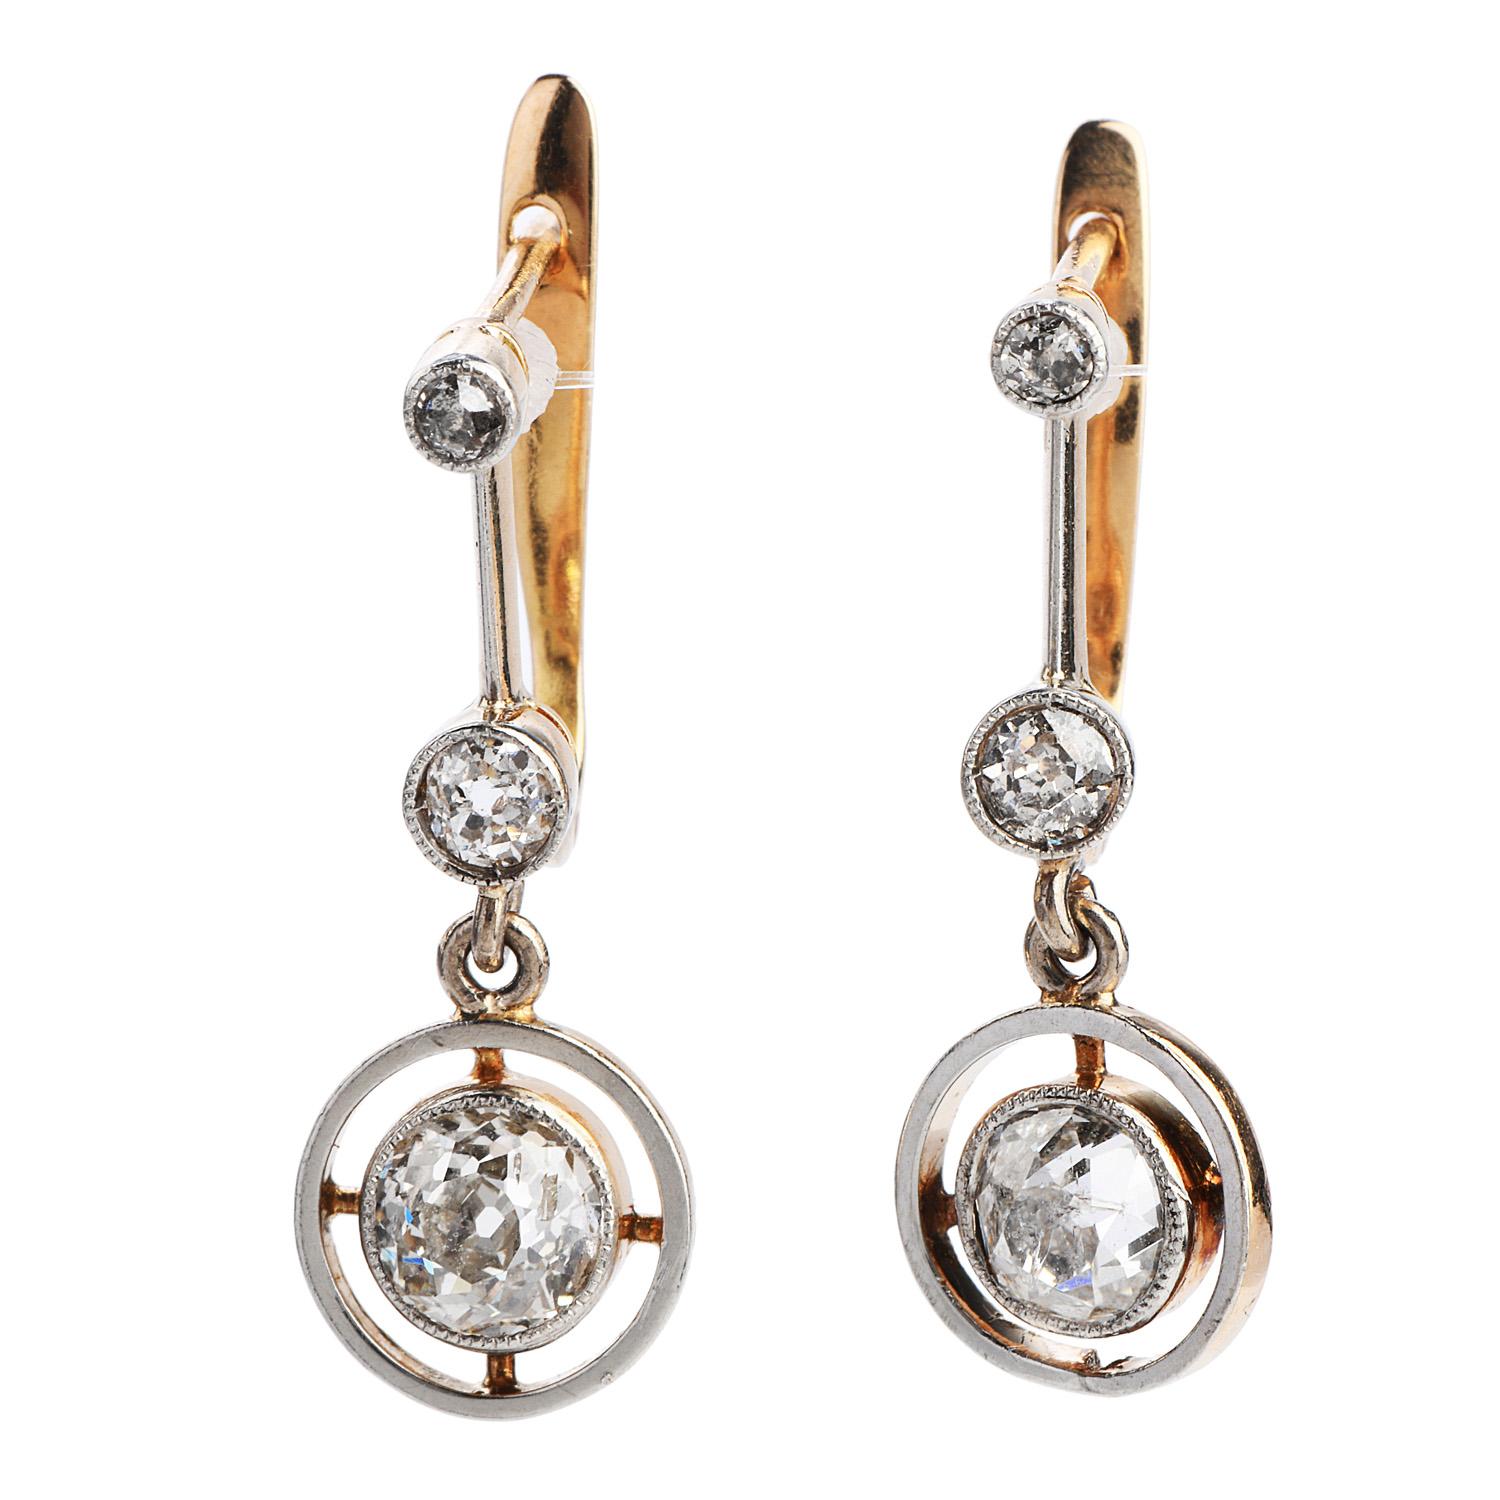 Live every day with a Soft Elegant touch of Antique!

If you love Old Cut Diamond we invite you to witness this particular beauty, These delightful earrings are crafted in 18K Yellow Gold. Their main stones are two prominent old European cut, Bezel